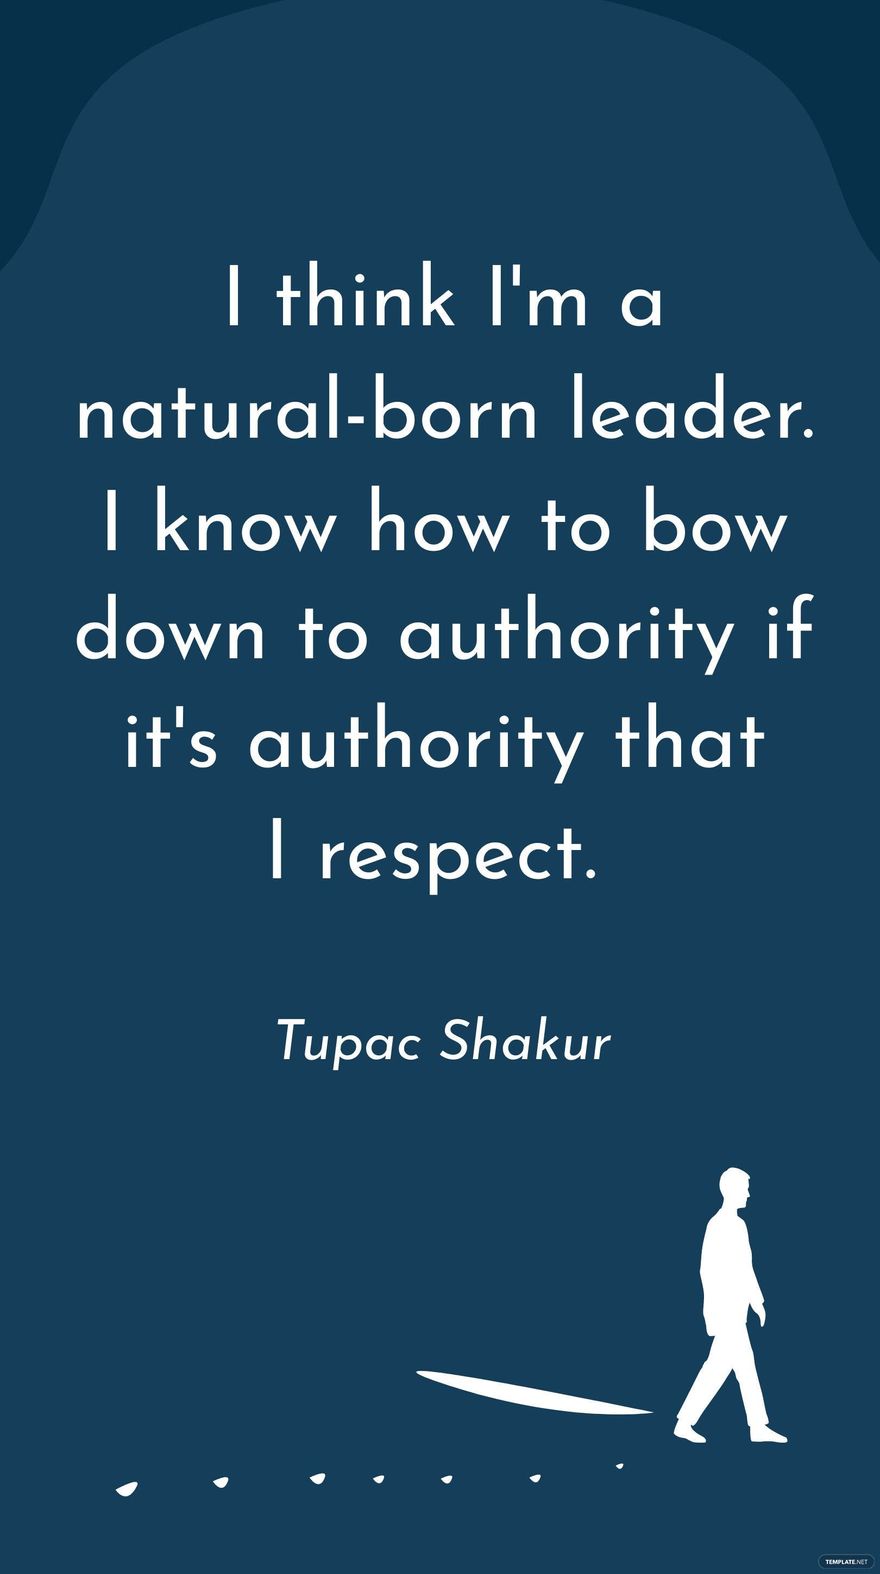 Free Tupac Shakur - I think I'm a natural-born leader. I know how to bow down to authority if it's authority that I respect. in JPG